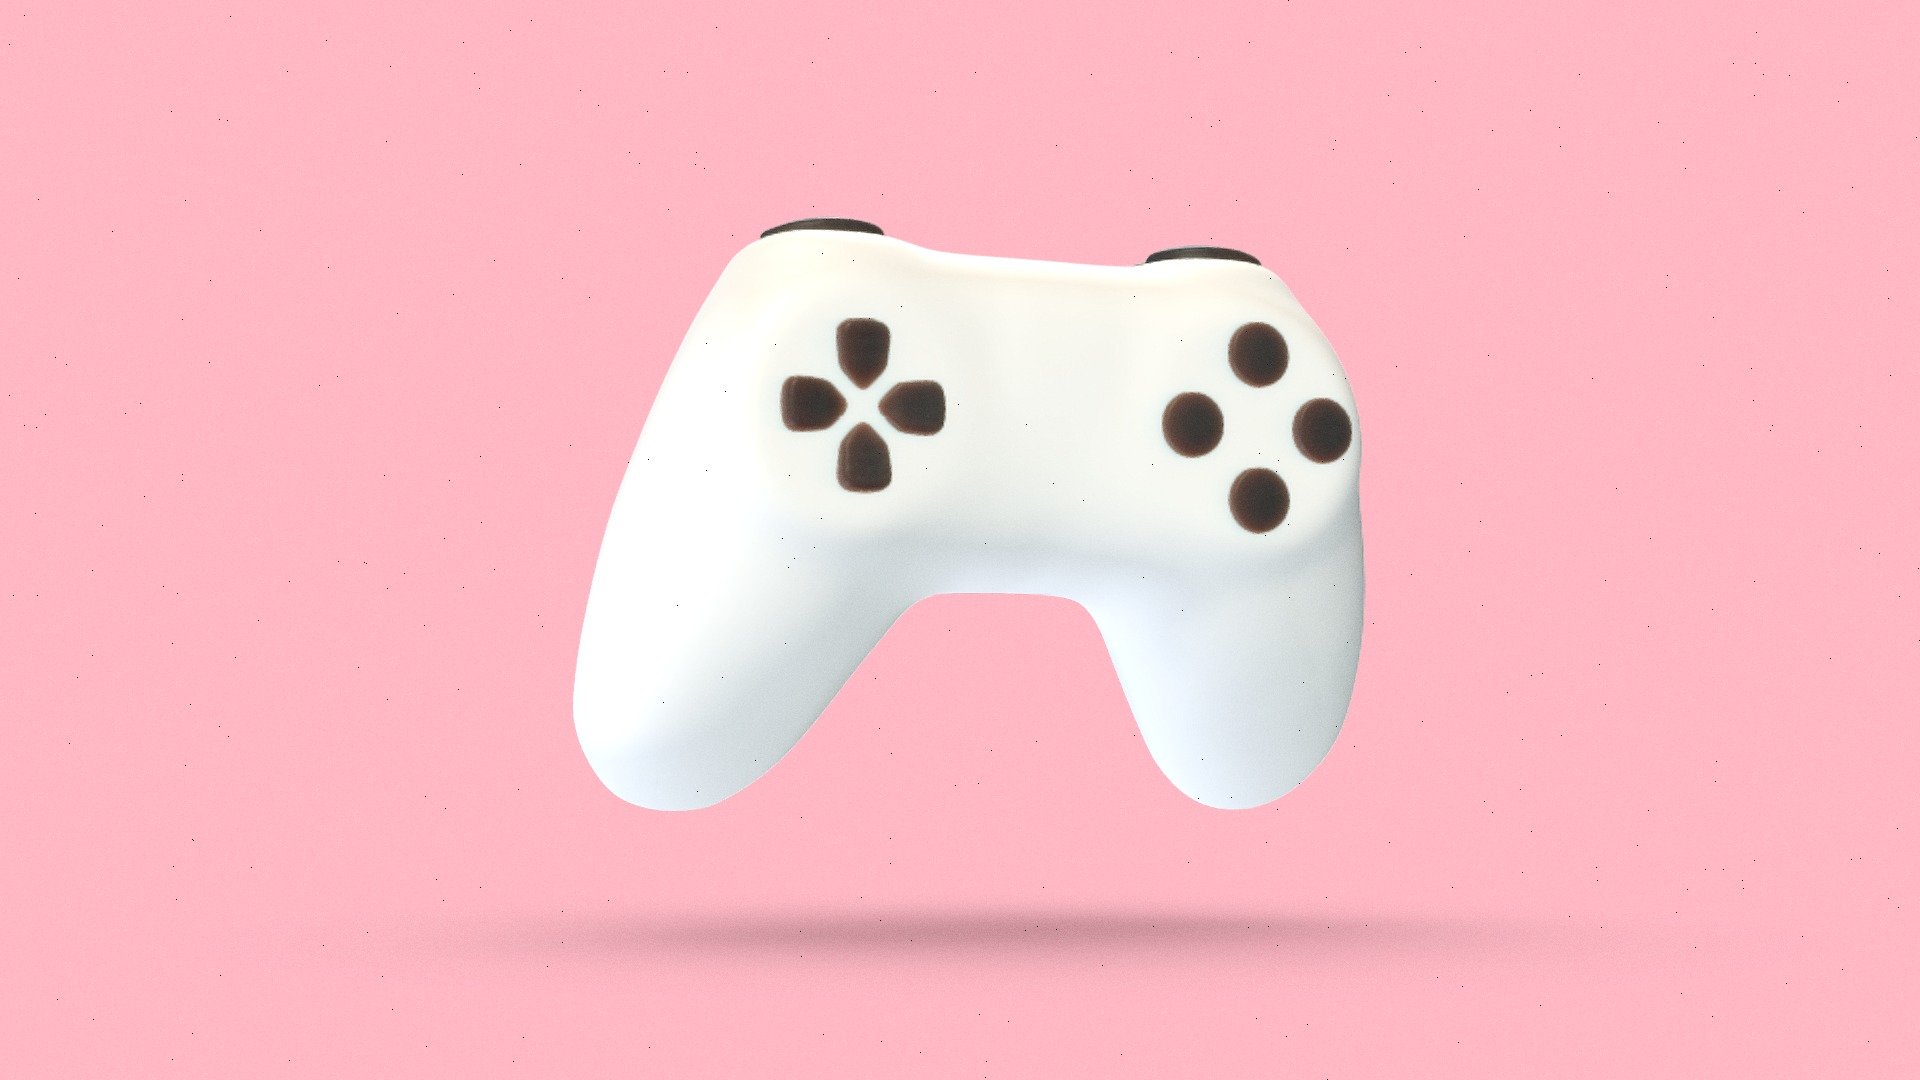 A gaming controller is a handheld device with buttons, joysticks, and other features used to interact with video games and provide a more immersive gaming experience 3d model